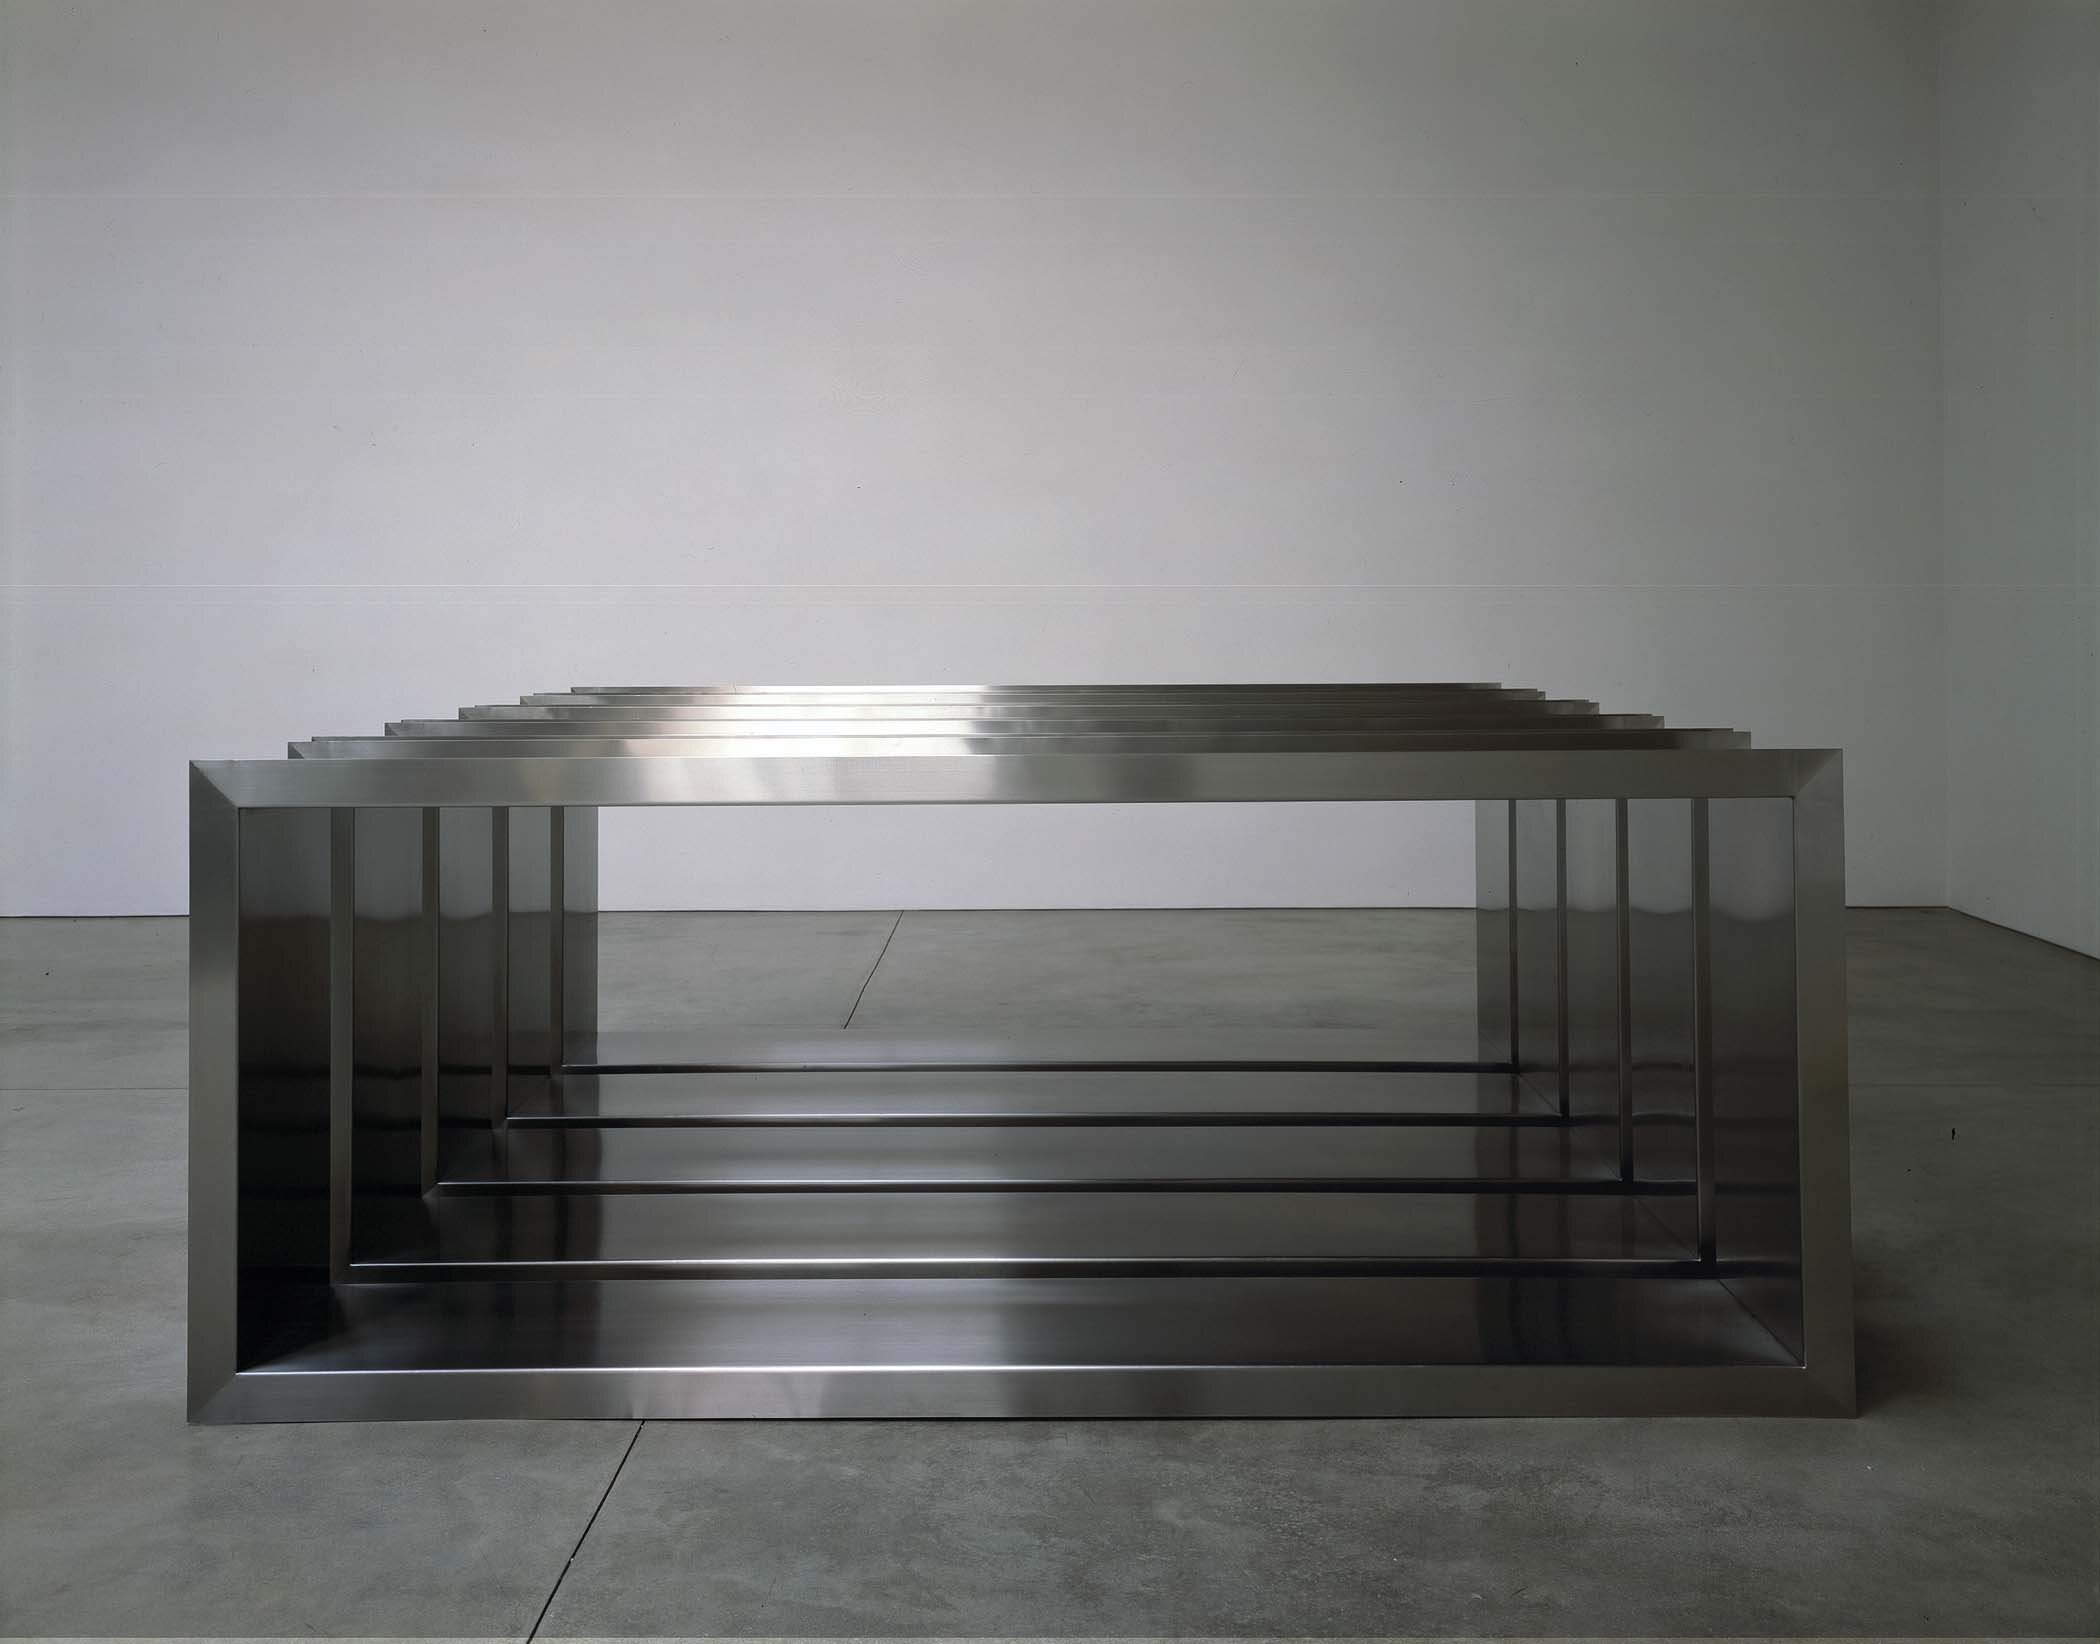  Donald Judd, untitled, 1968, stainless steel, 5 units, each: 48 x 120 x 20 in. (122 x 304.8 x 50.8 cm). Installation view,  Sculpture: Donald Judd, Sherrie Levine, Sol LeWitt, Tony Smith, Jackie Winsor,  Paula Cooper Gallery, 534 W 21st Street, New 